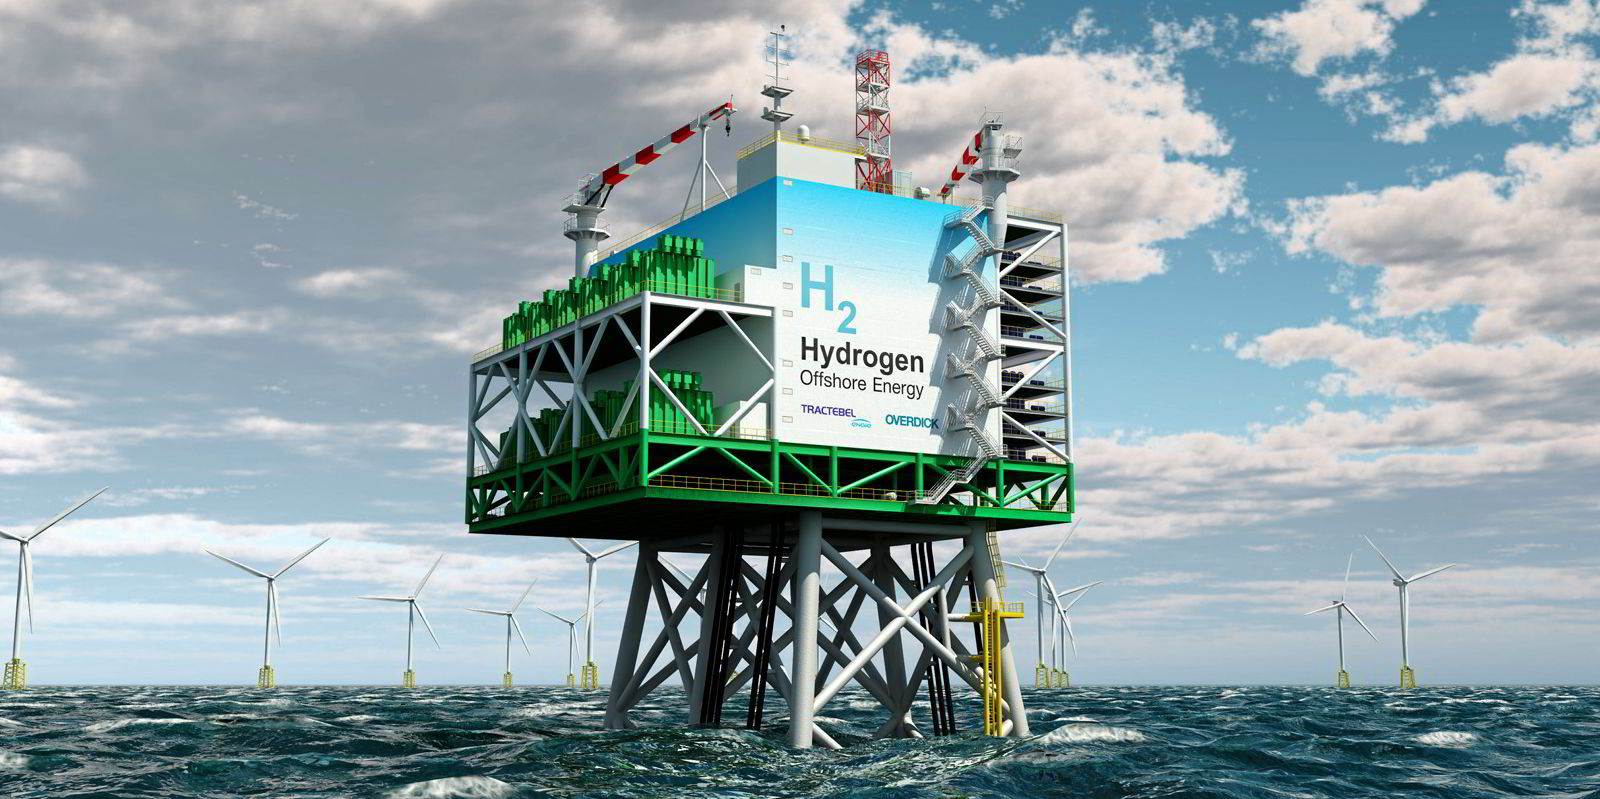 Africa leading green hydrogen projects